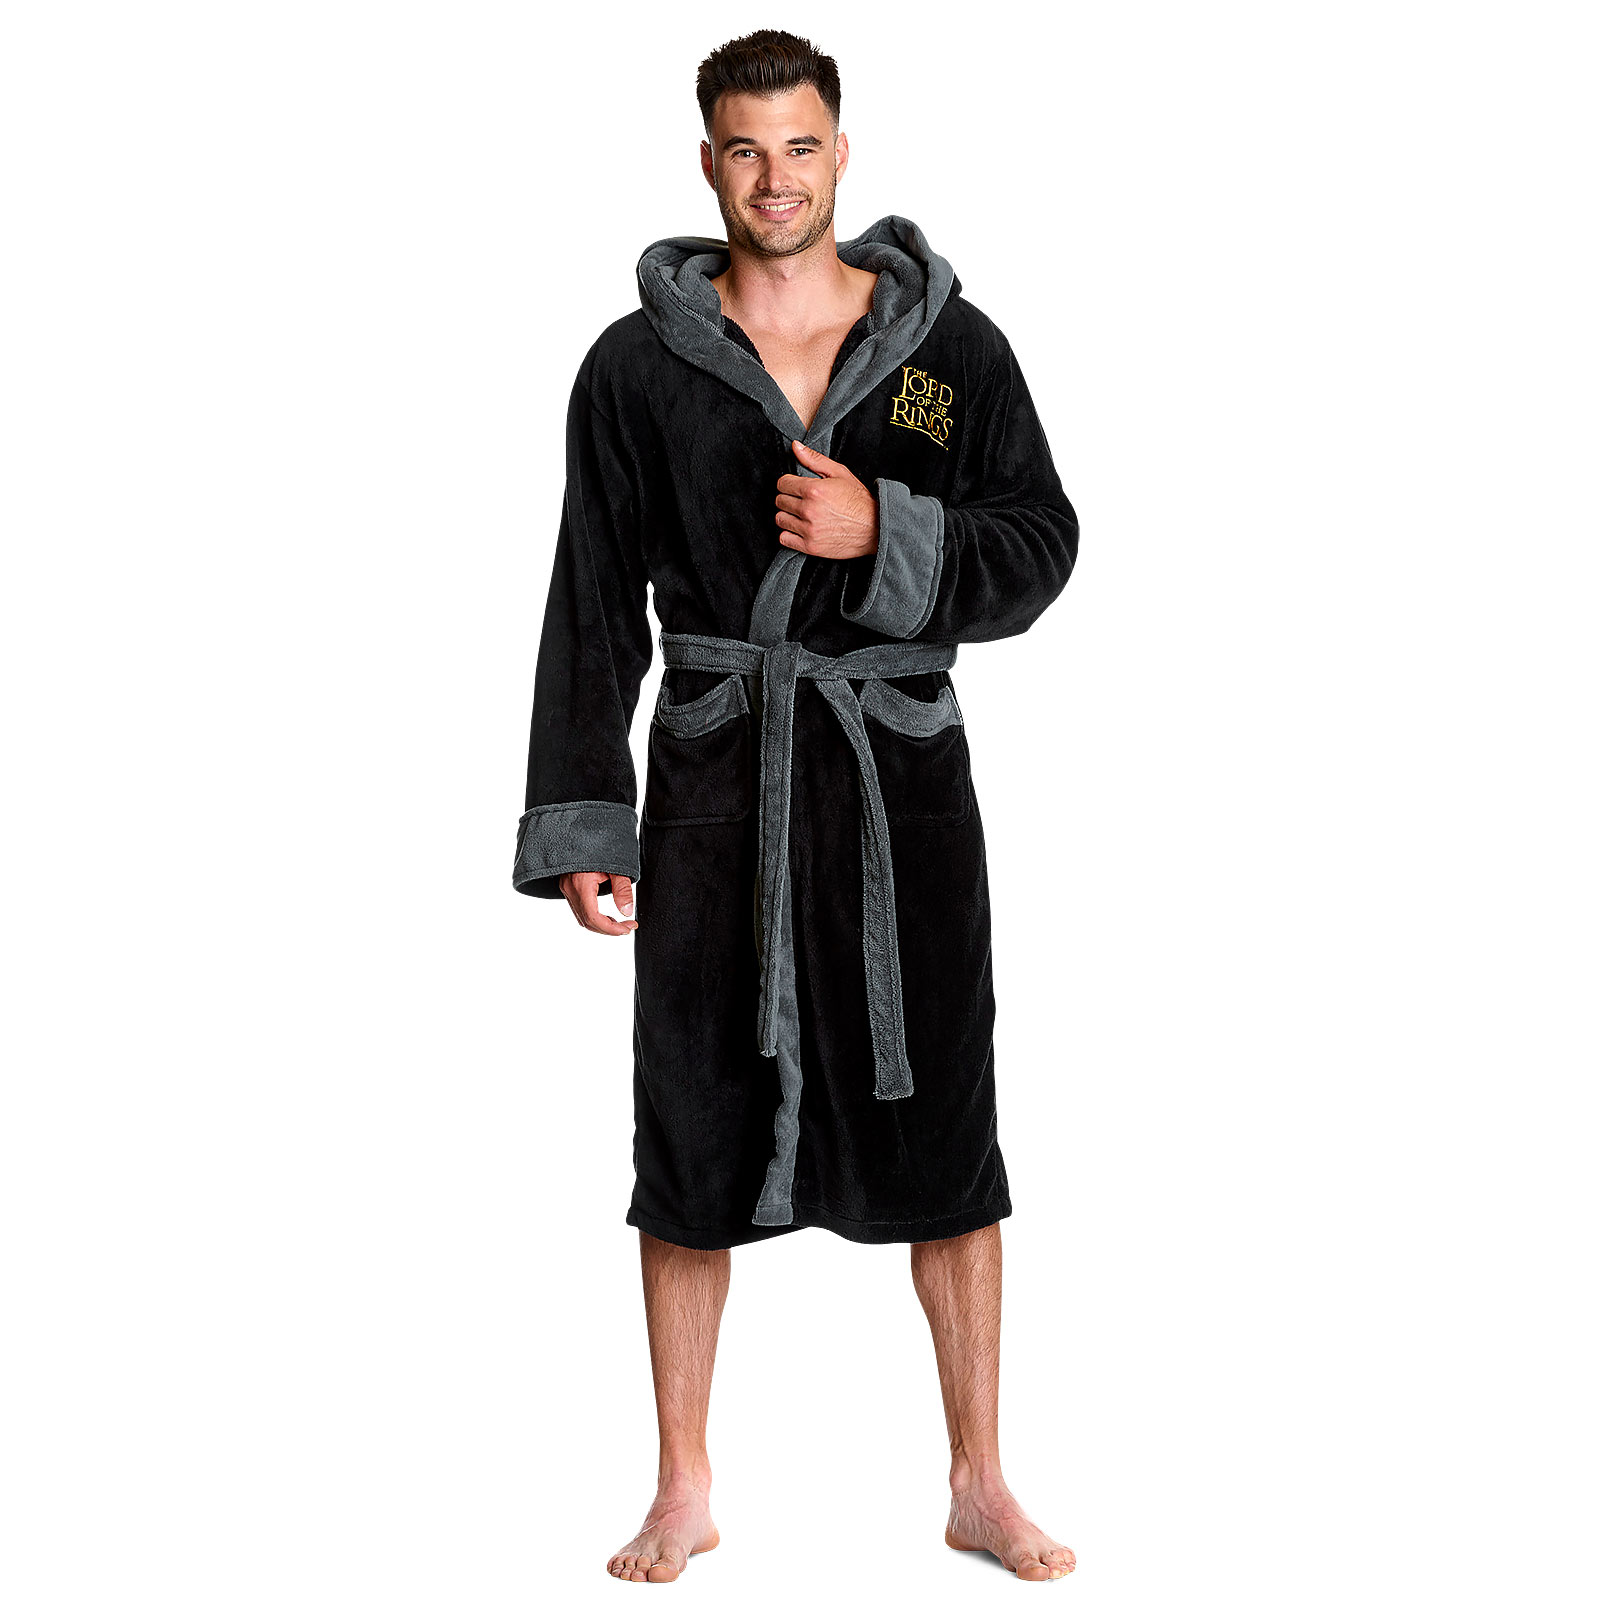 Lord of the Rings - The One Bathrobe Black